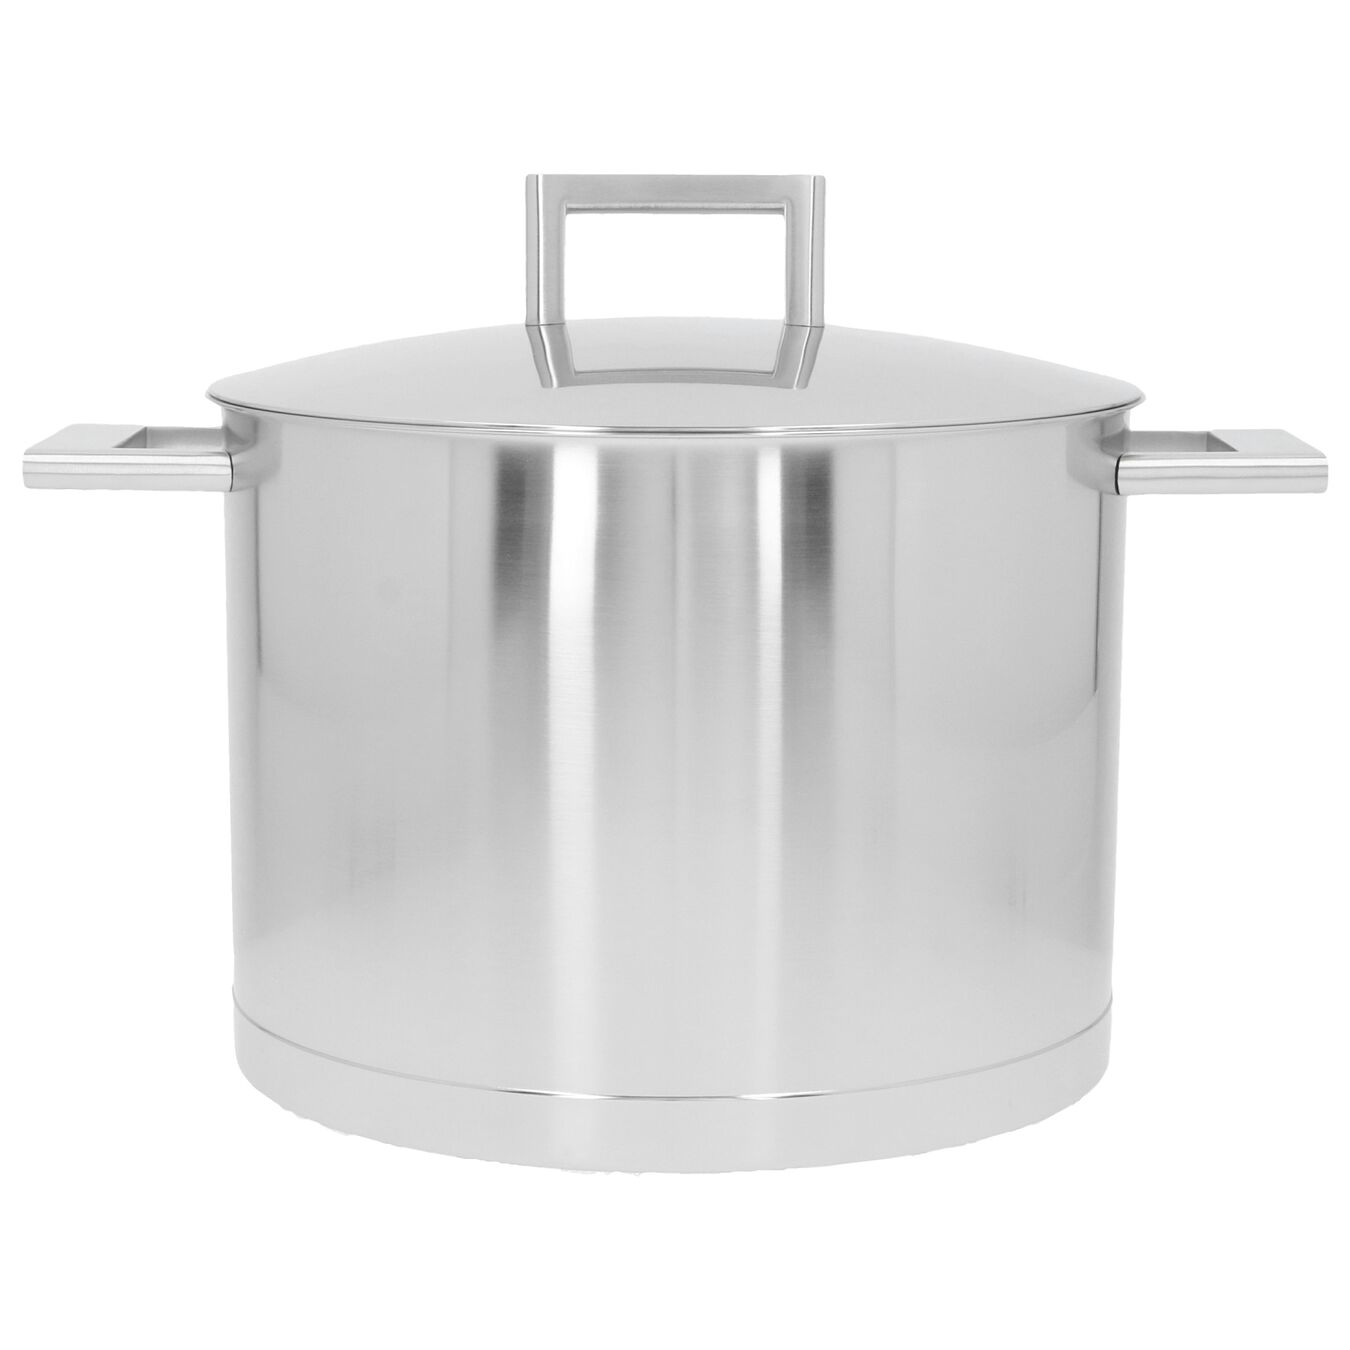 Demeyere John Pawson stockpot with Double-walled Lid